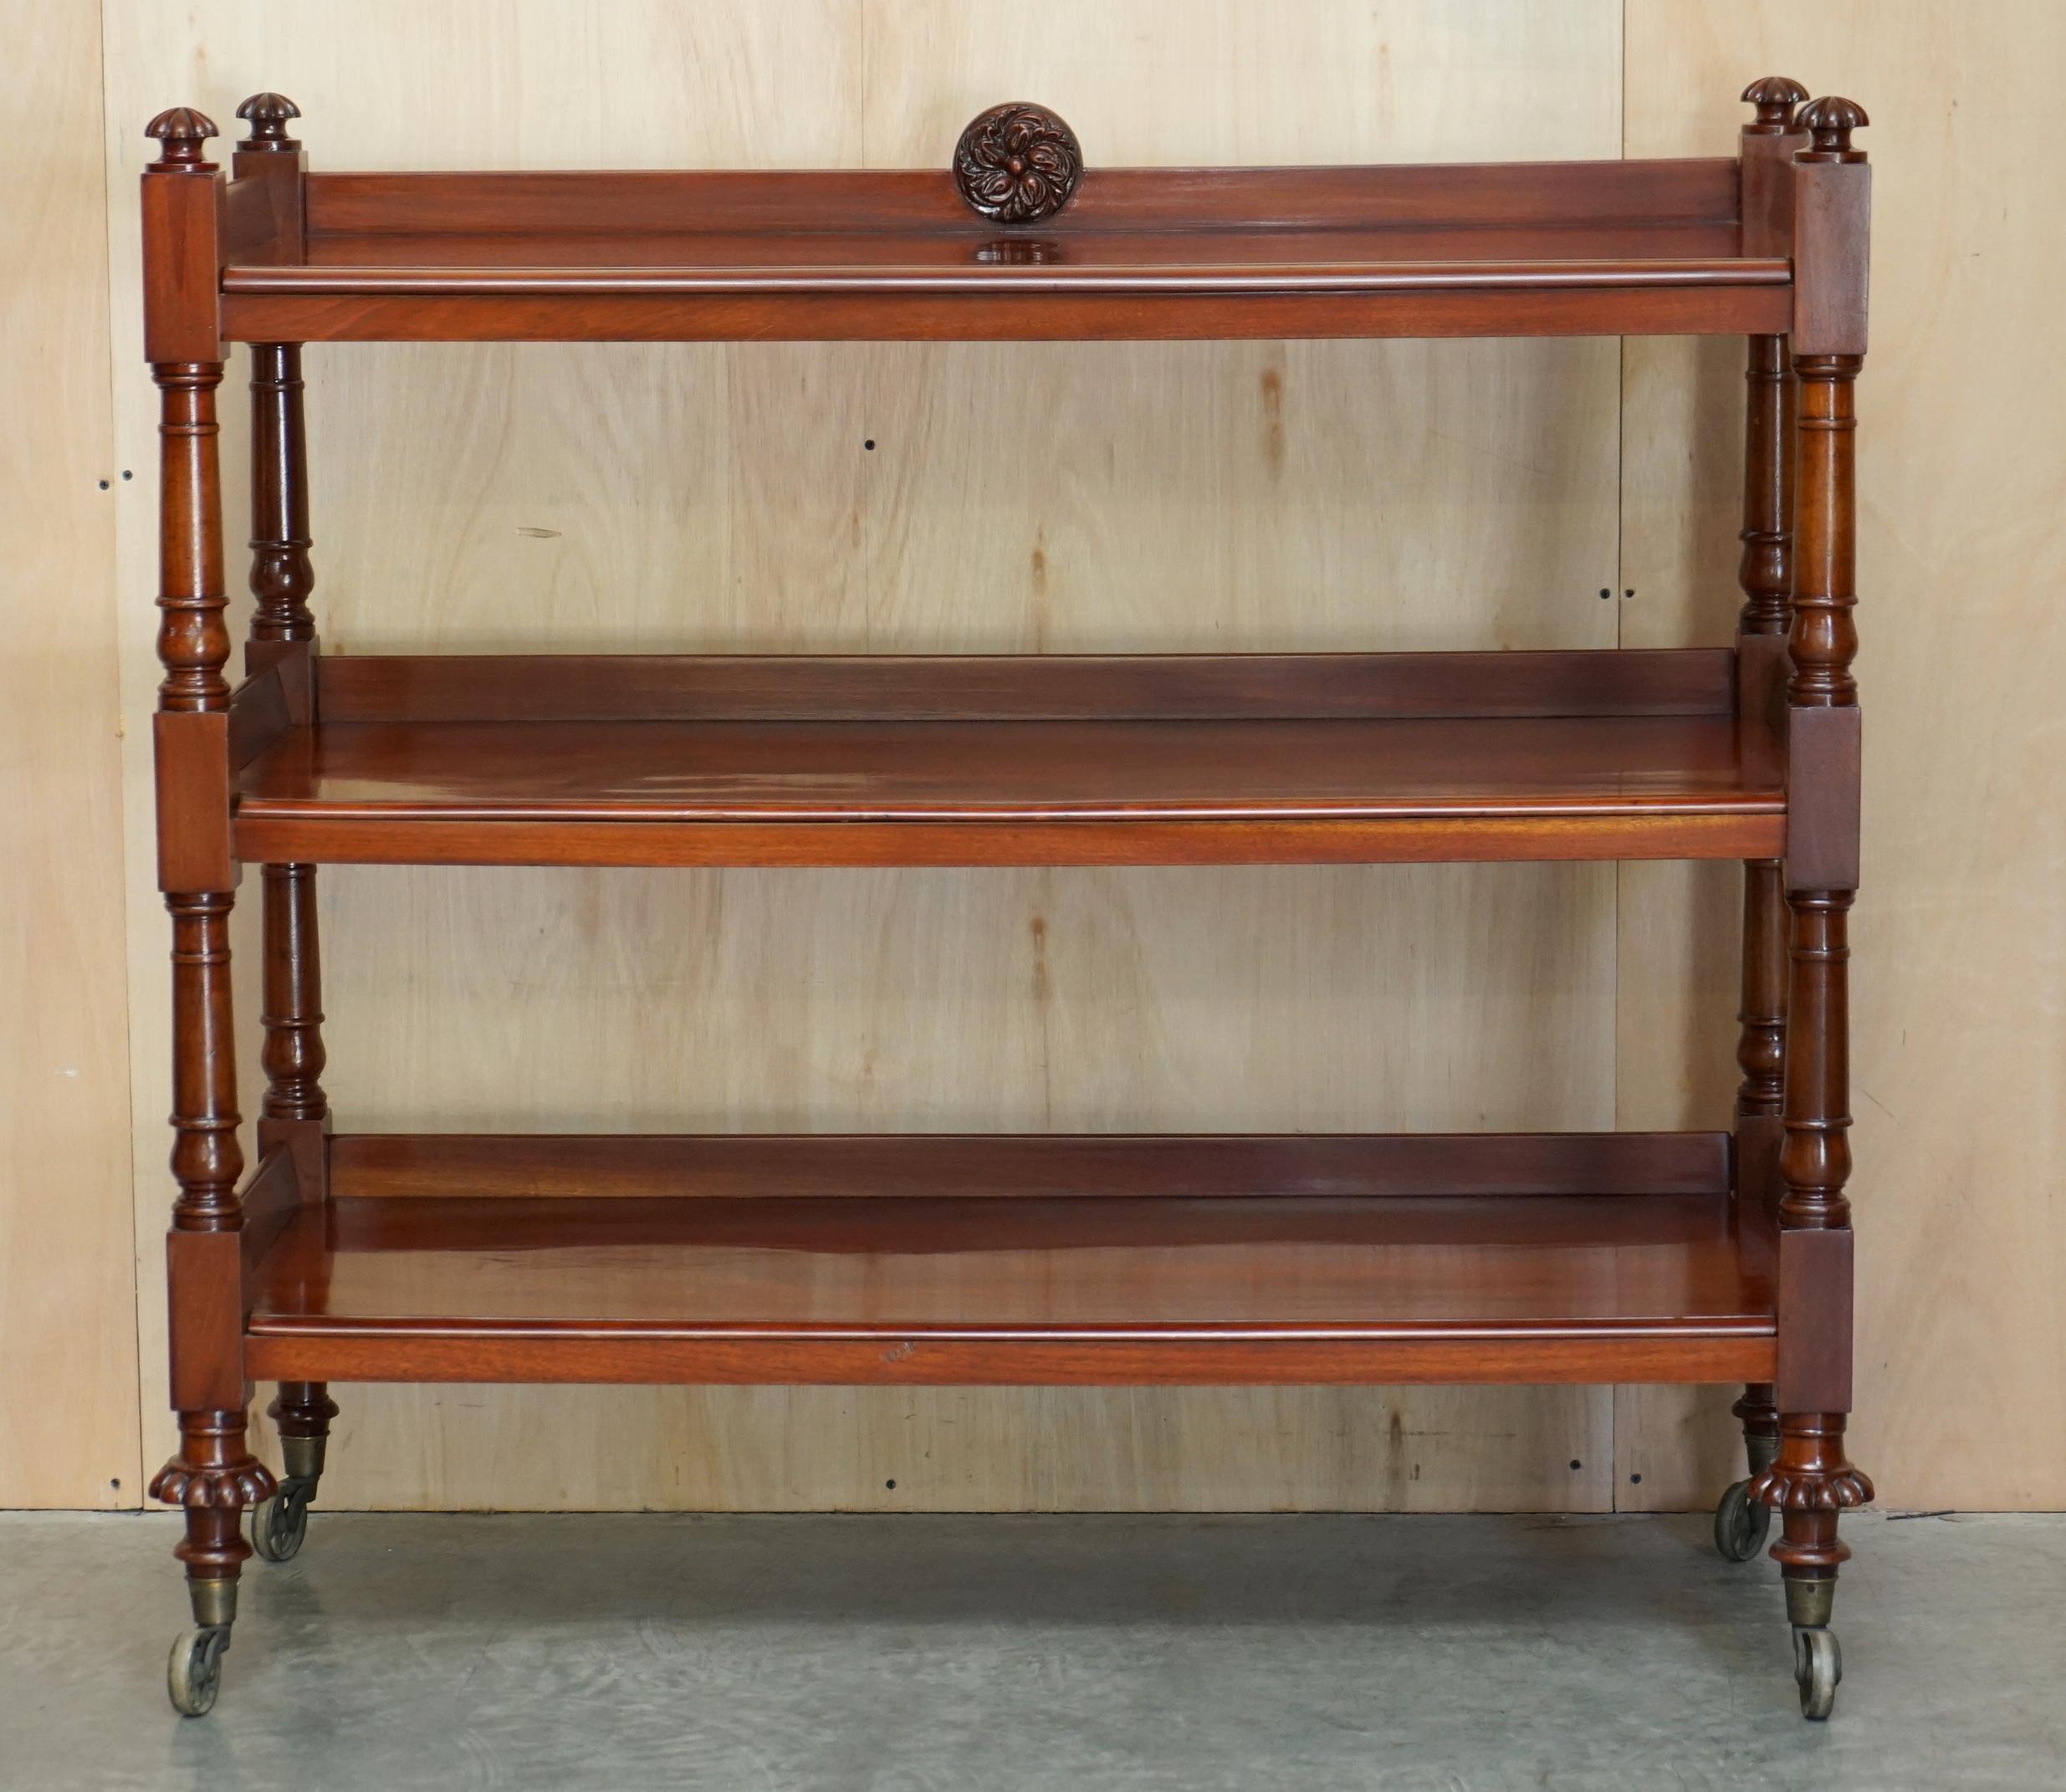 We are delighted to offer for sale this very fine original circa 1840 English mahogany library bookshelf trolley on oversized William IV wagon wheels.

A good looking well made and decorative piece, this trolley can be used as a buffet piece or